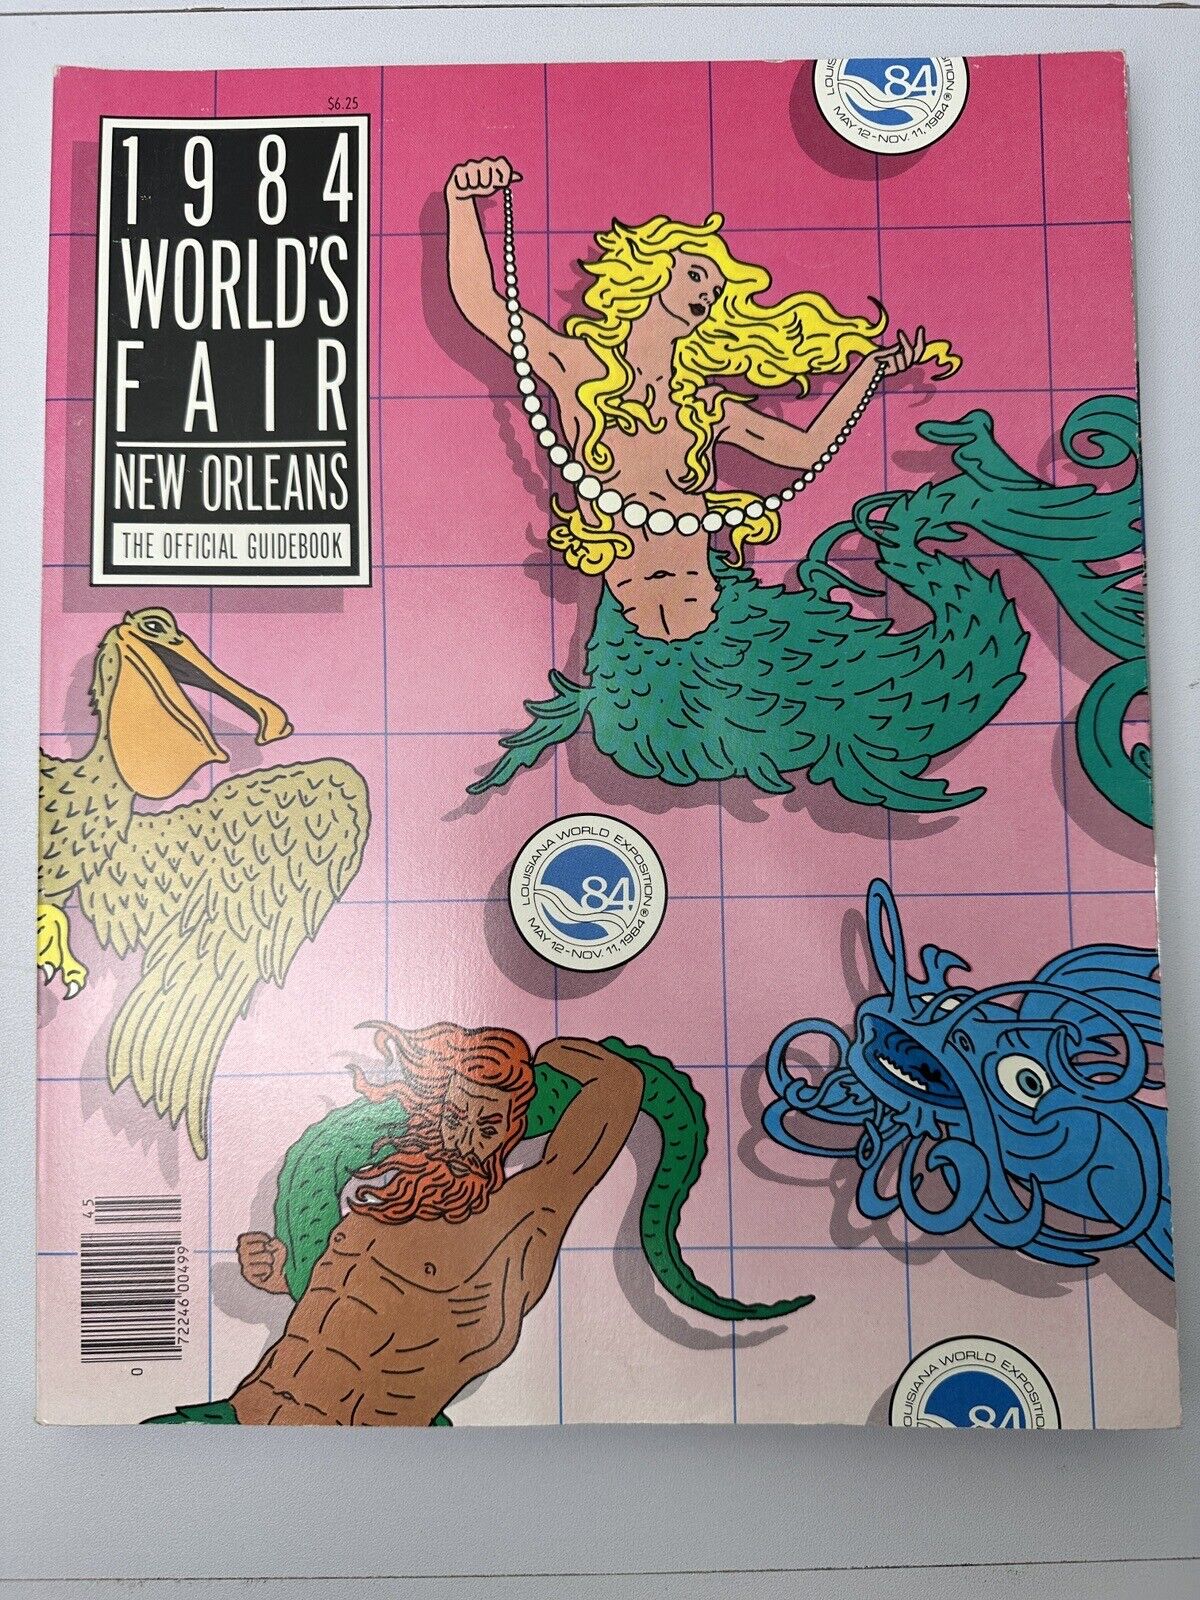 VTG 1984 Worlds fair New Orleans Official Guidebook Cover by Steven Max Singer